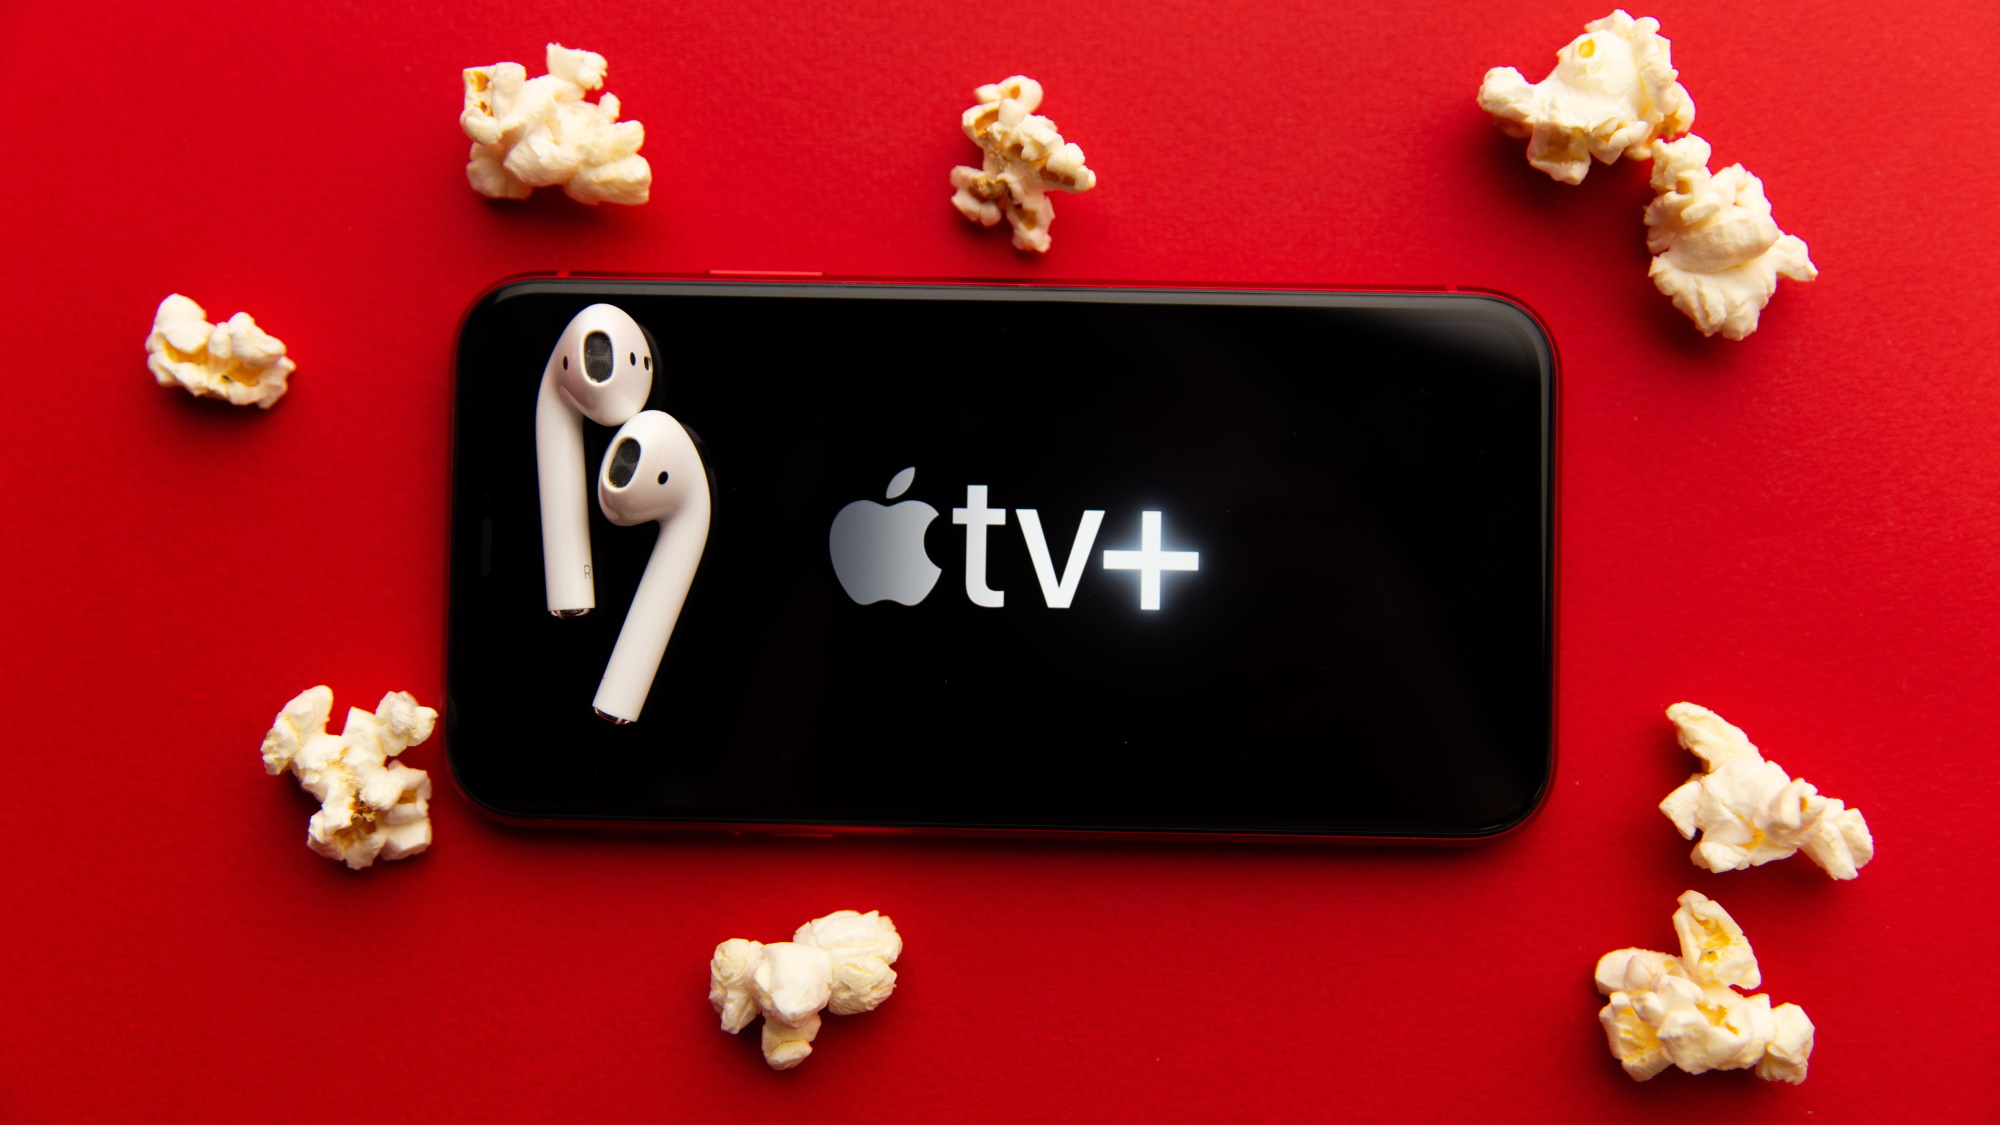 TV shows, movies, cost, devices and more | TechRadar